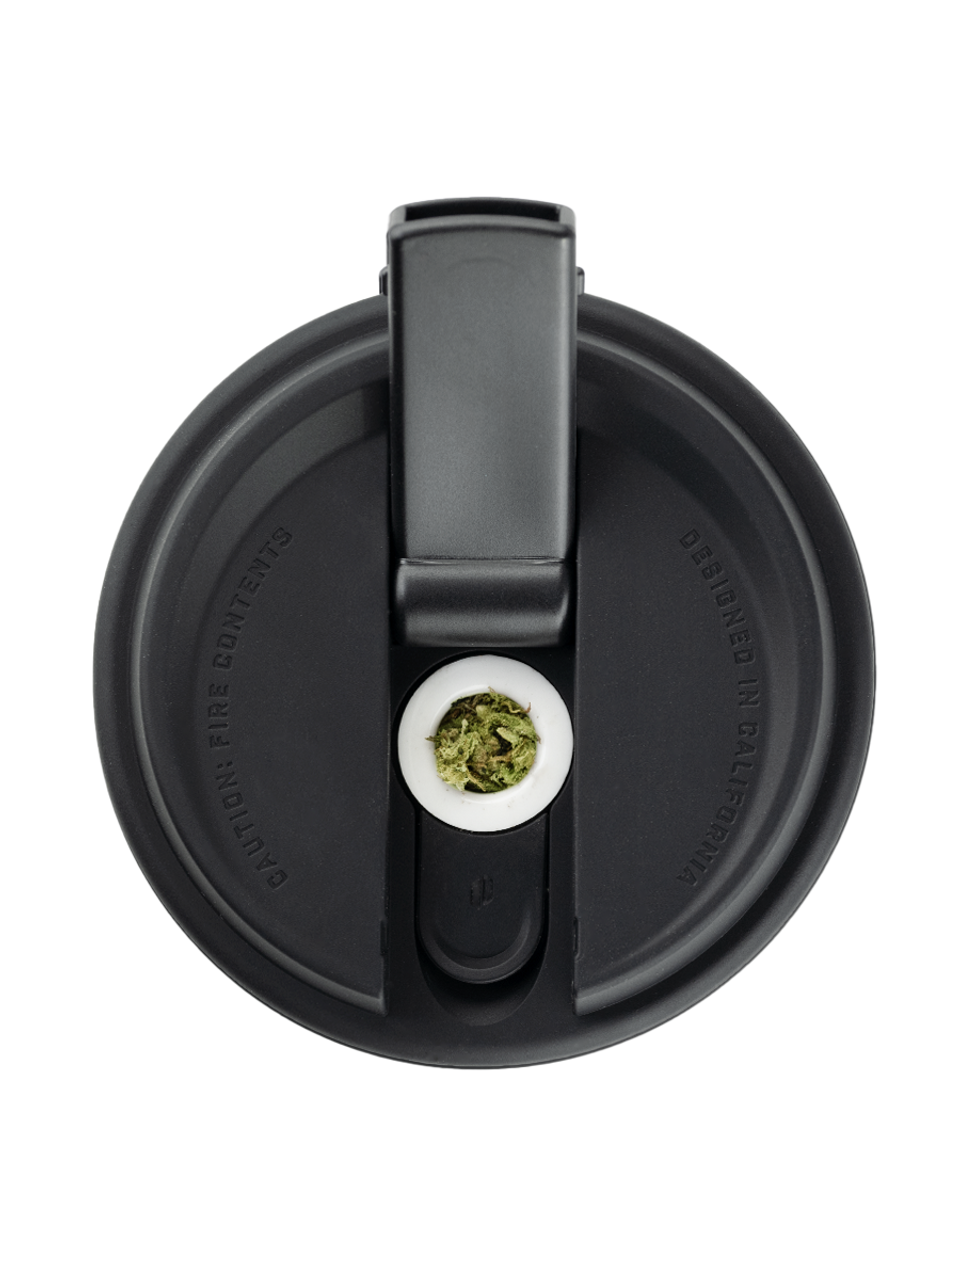 Puffco Cupsy Coffee Cup Water Pipe top view with herb chamber, discreet design